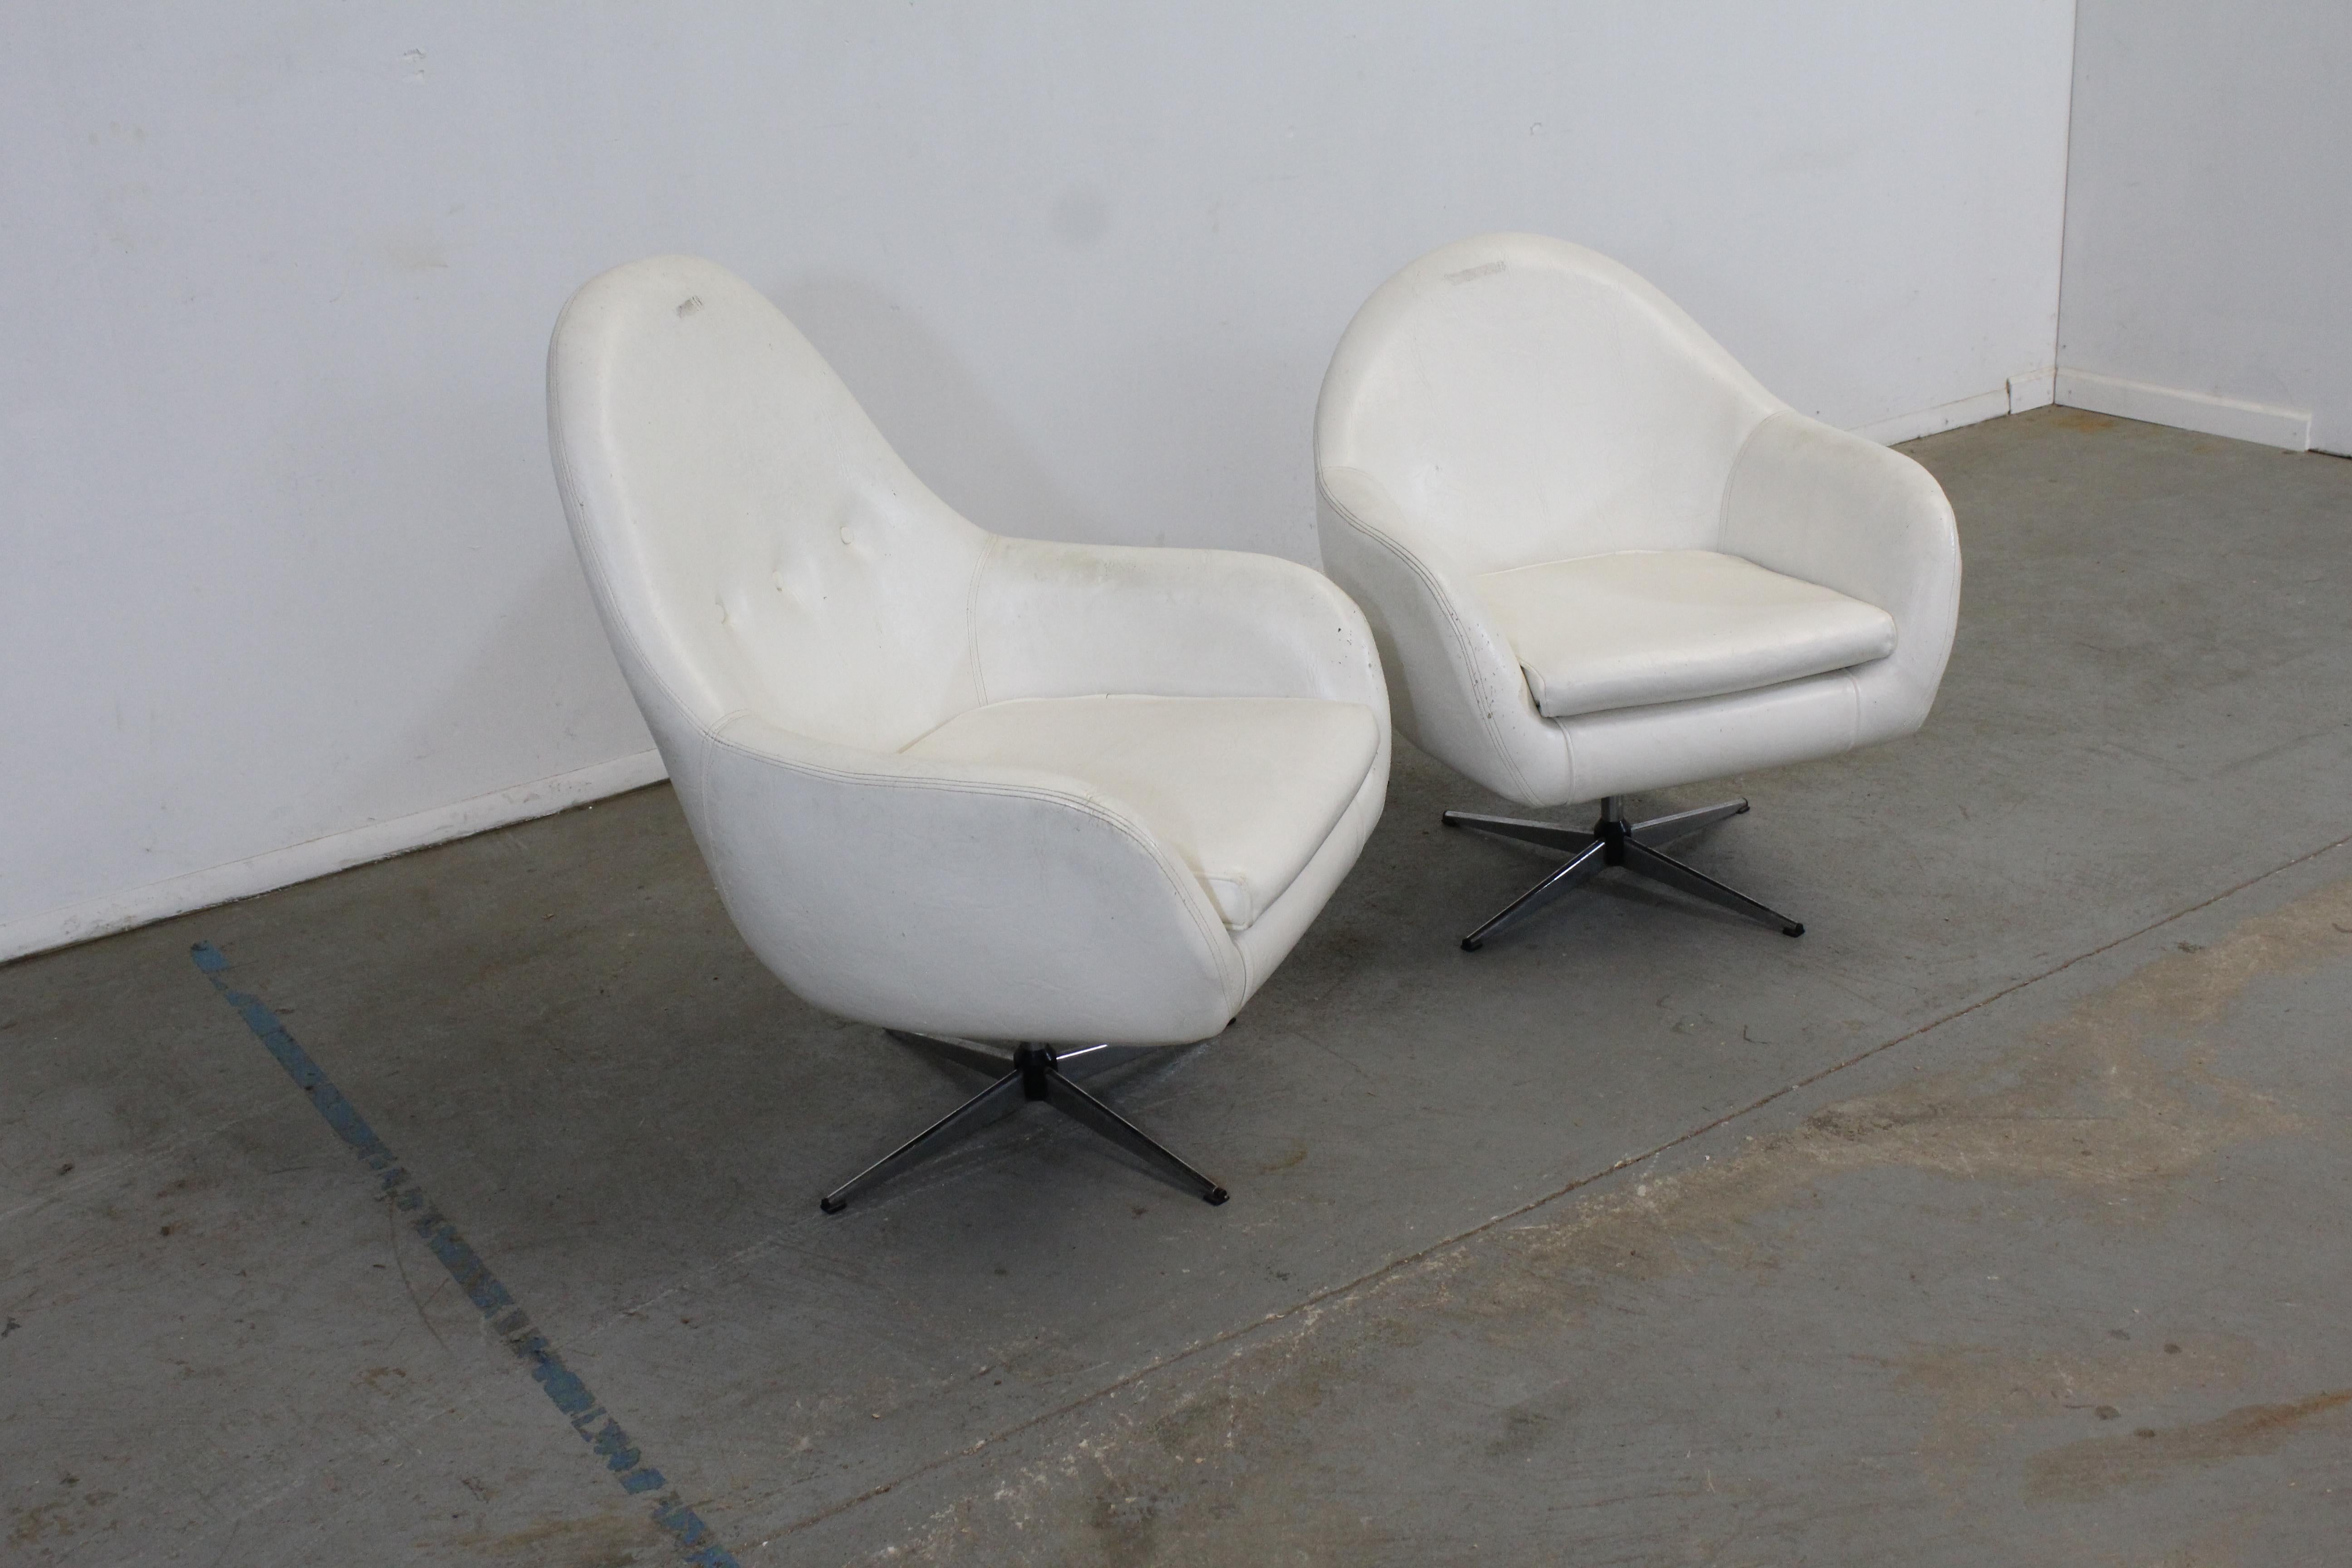 Pair of Vintage Mid-Century Modern his & her lounge/pod chairs

Offered is a pair of Vintage Mid-Century Modern his & her lounge/pod chairs. Absolutely incredible lines on these chairs. They are in structurally sound condition and need to be